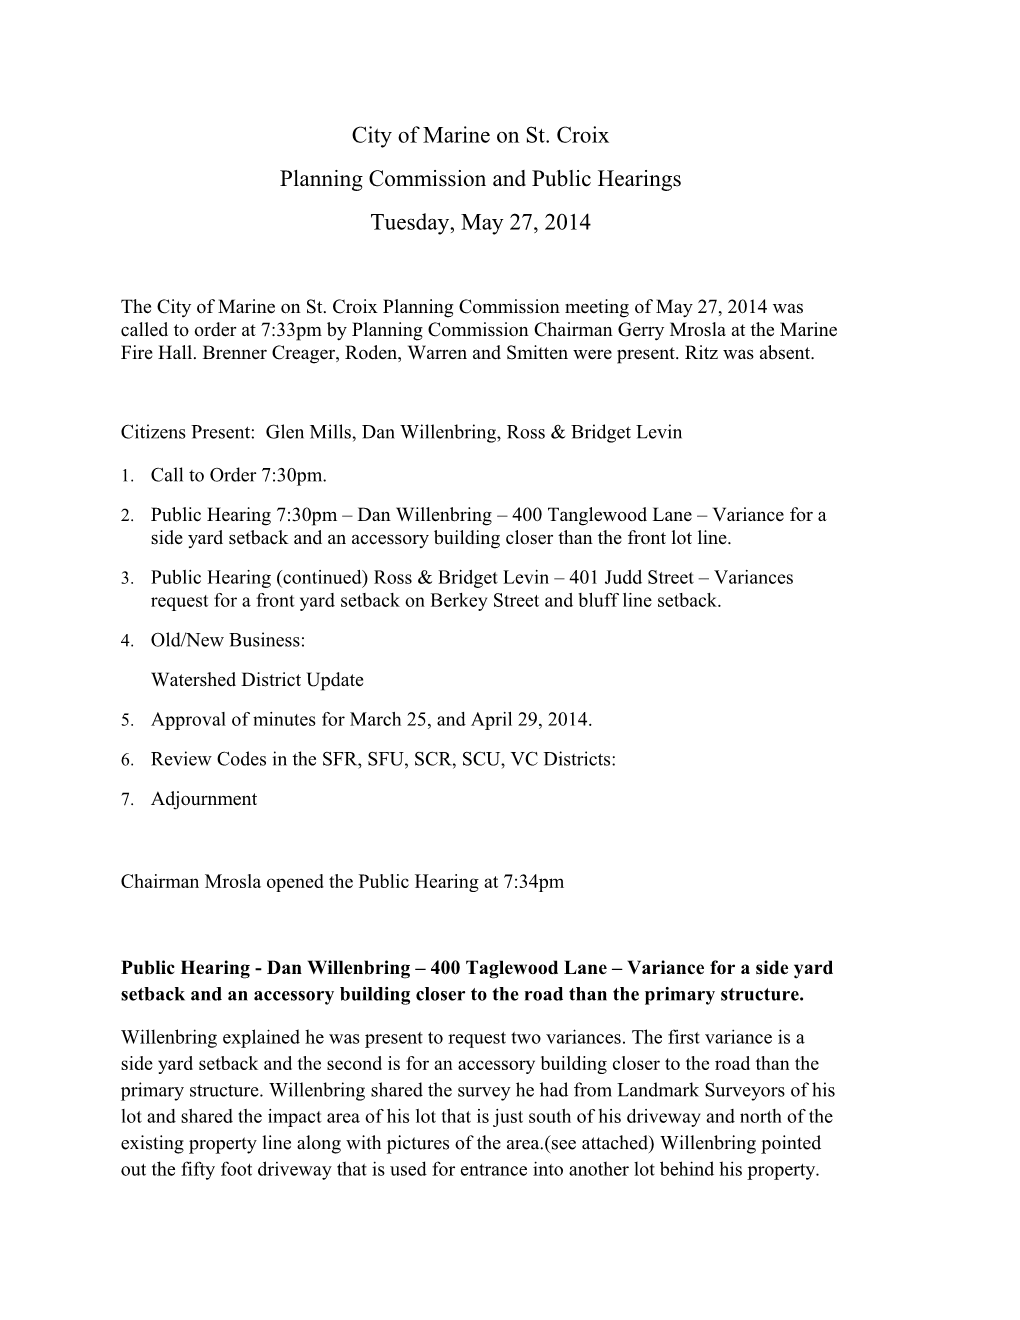 Planning Commission and Public Hearings